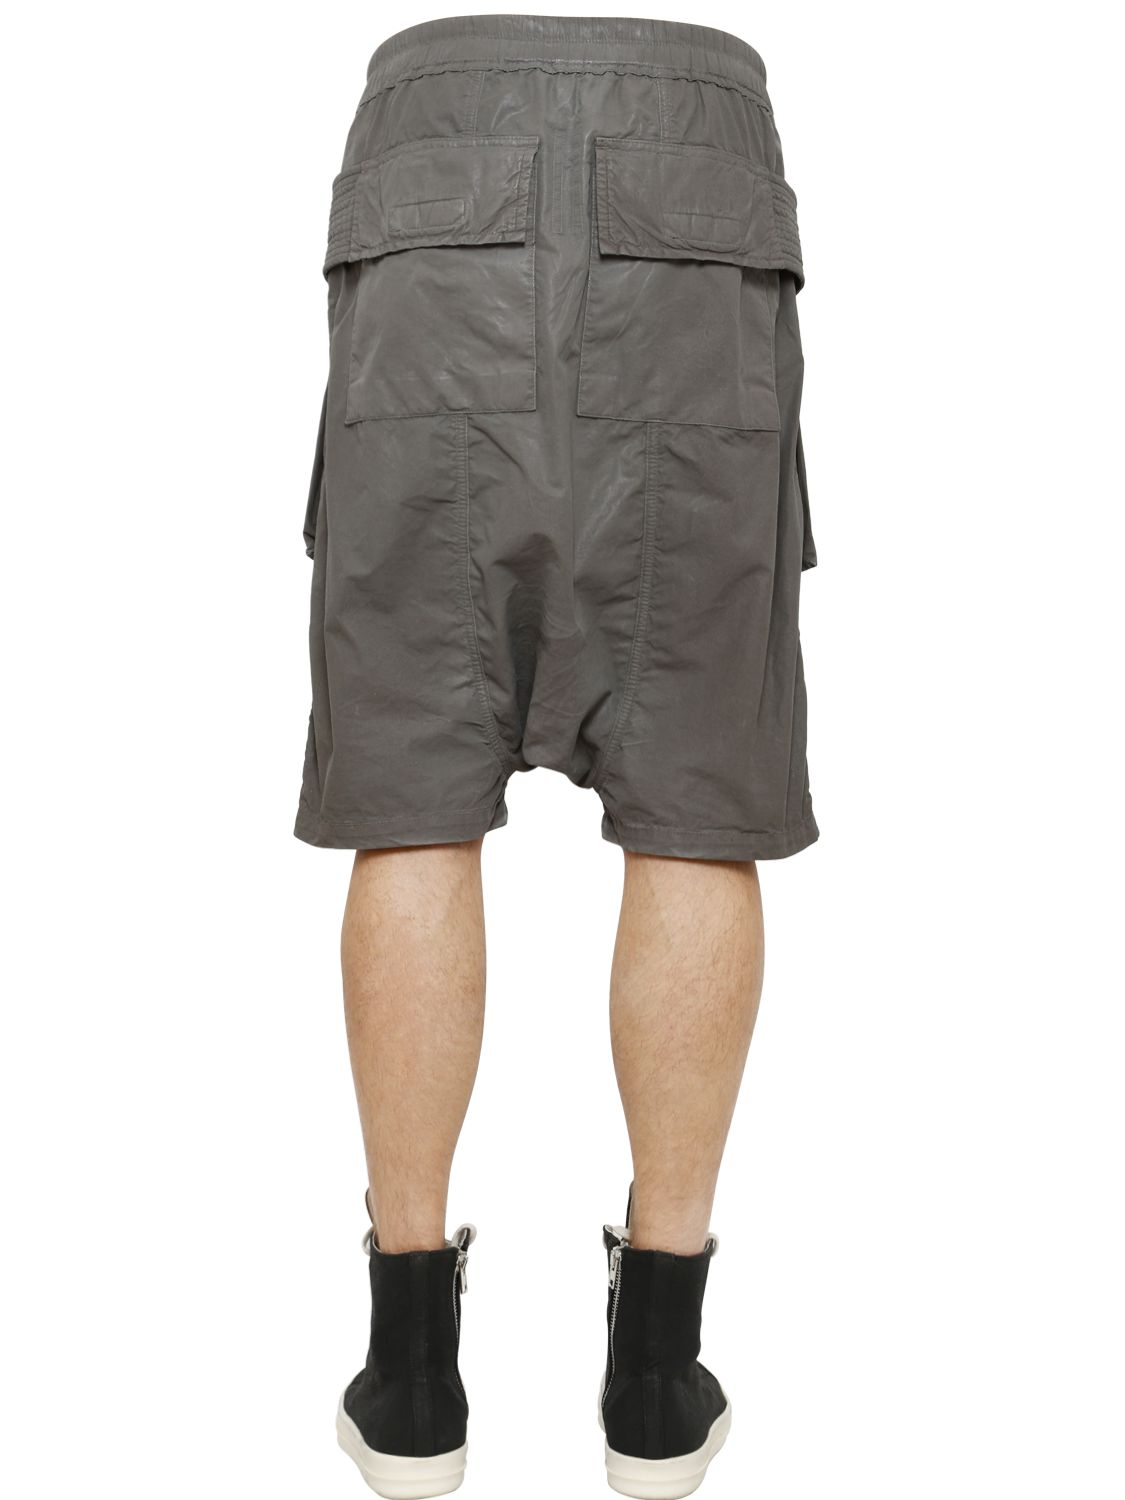 Rick Owens Drkshdw Waxed Cotton Cargo Shorts in Gray for Men - Lyst